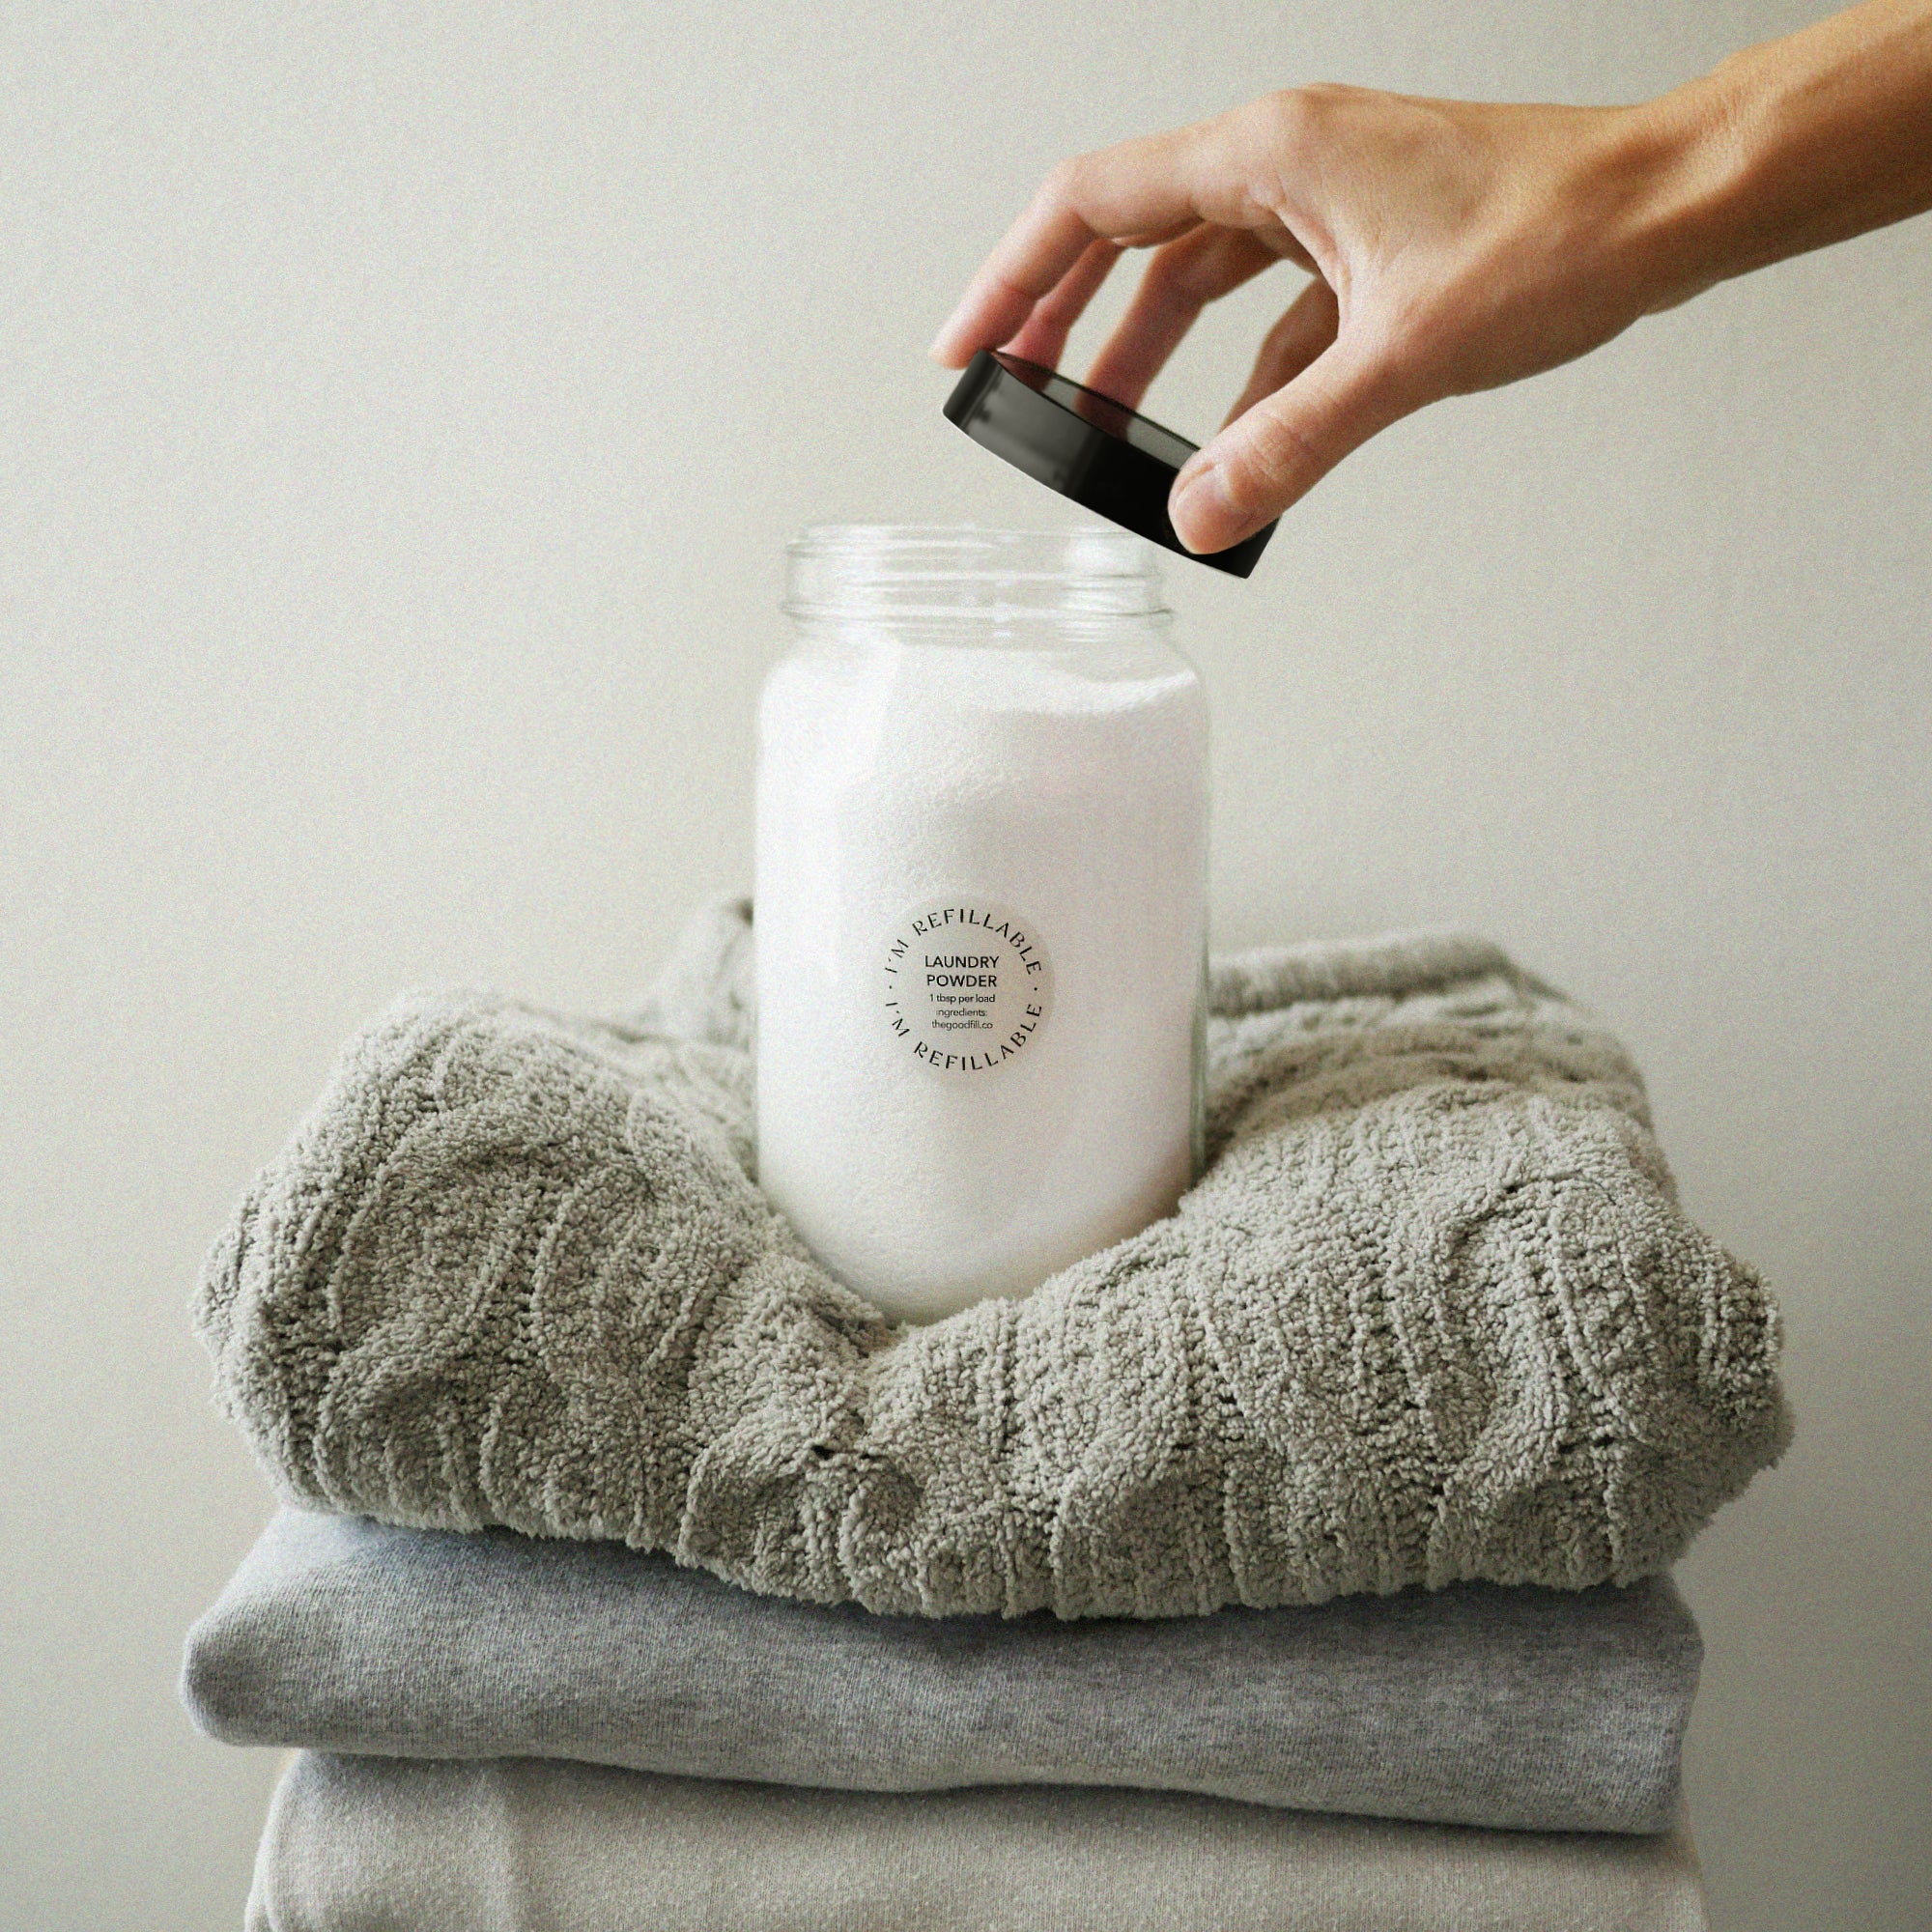 refillable laundry powder in a glass jar.